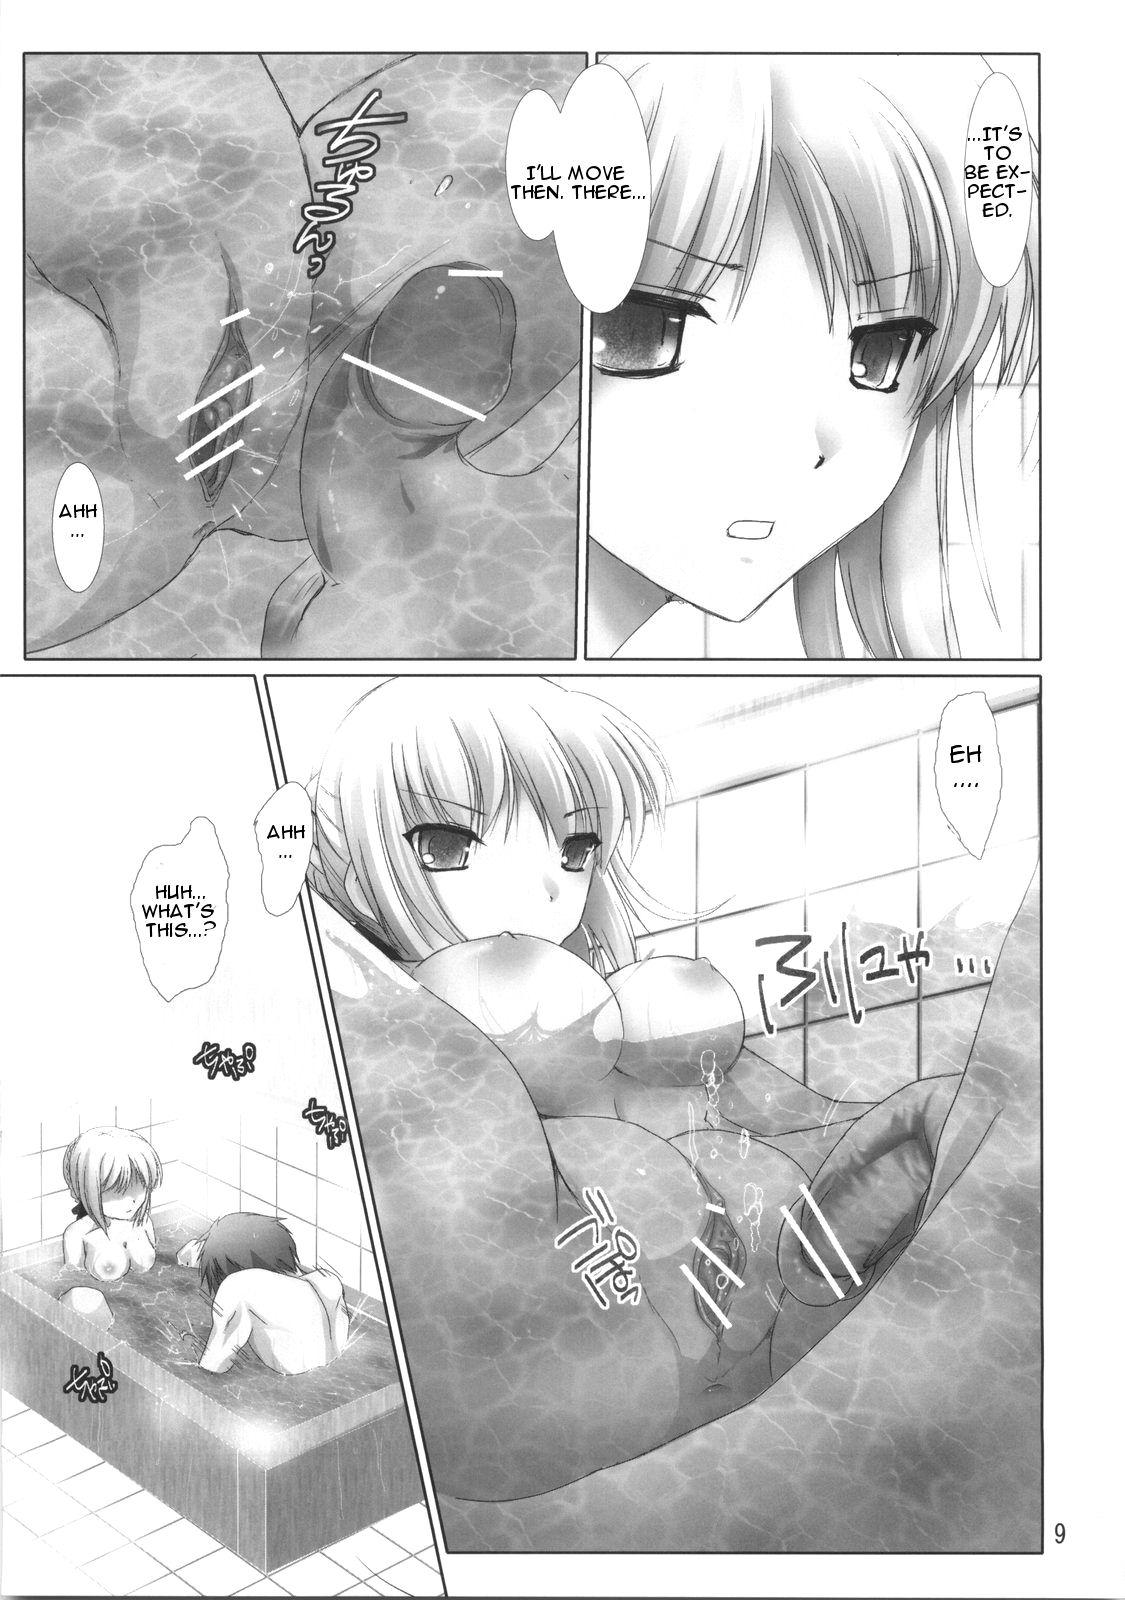 Cheating Wife BLACK 99% - Fate stay night Fate hollow ataraxia Gay Physicals - Page 8